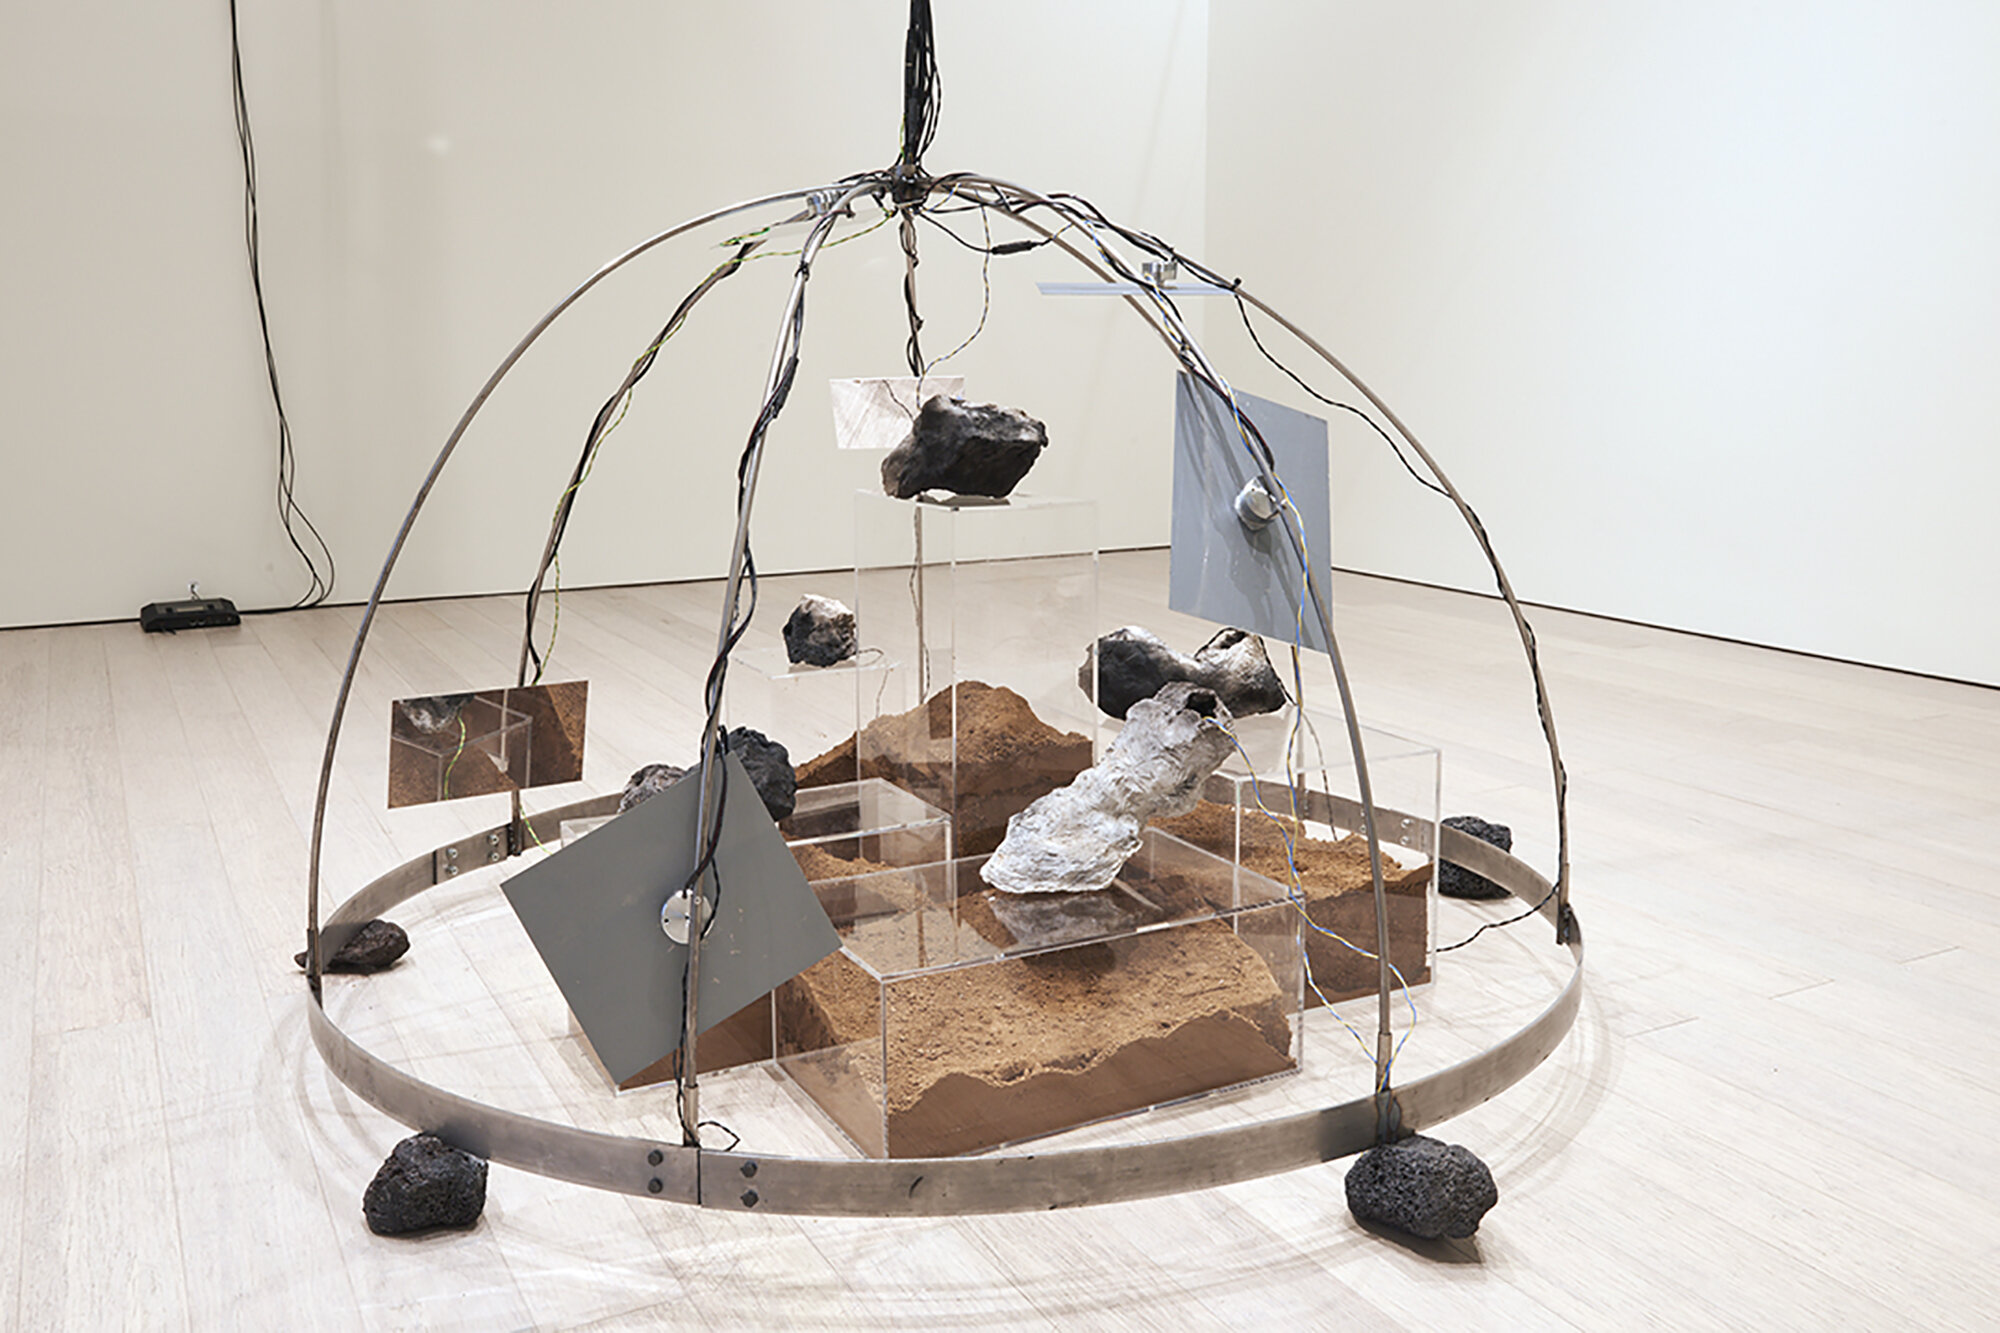  Yixuan Shao and Bicheng Liang  Left Without The Means To Move , (detail) 2021 Lava rocks, anodized aluminum, bone conductors, pit fired wild clay and sound recorded within, desert soil, amplified microphones, speakers, subwoofers, and other mixed me